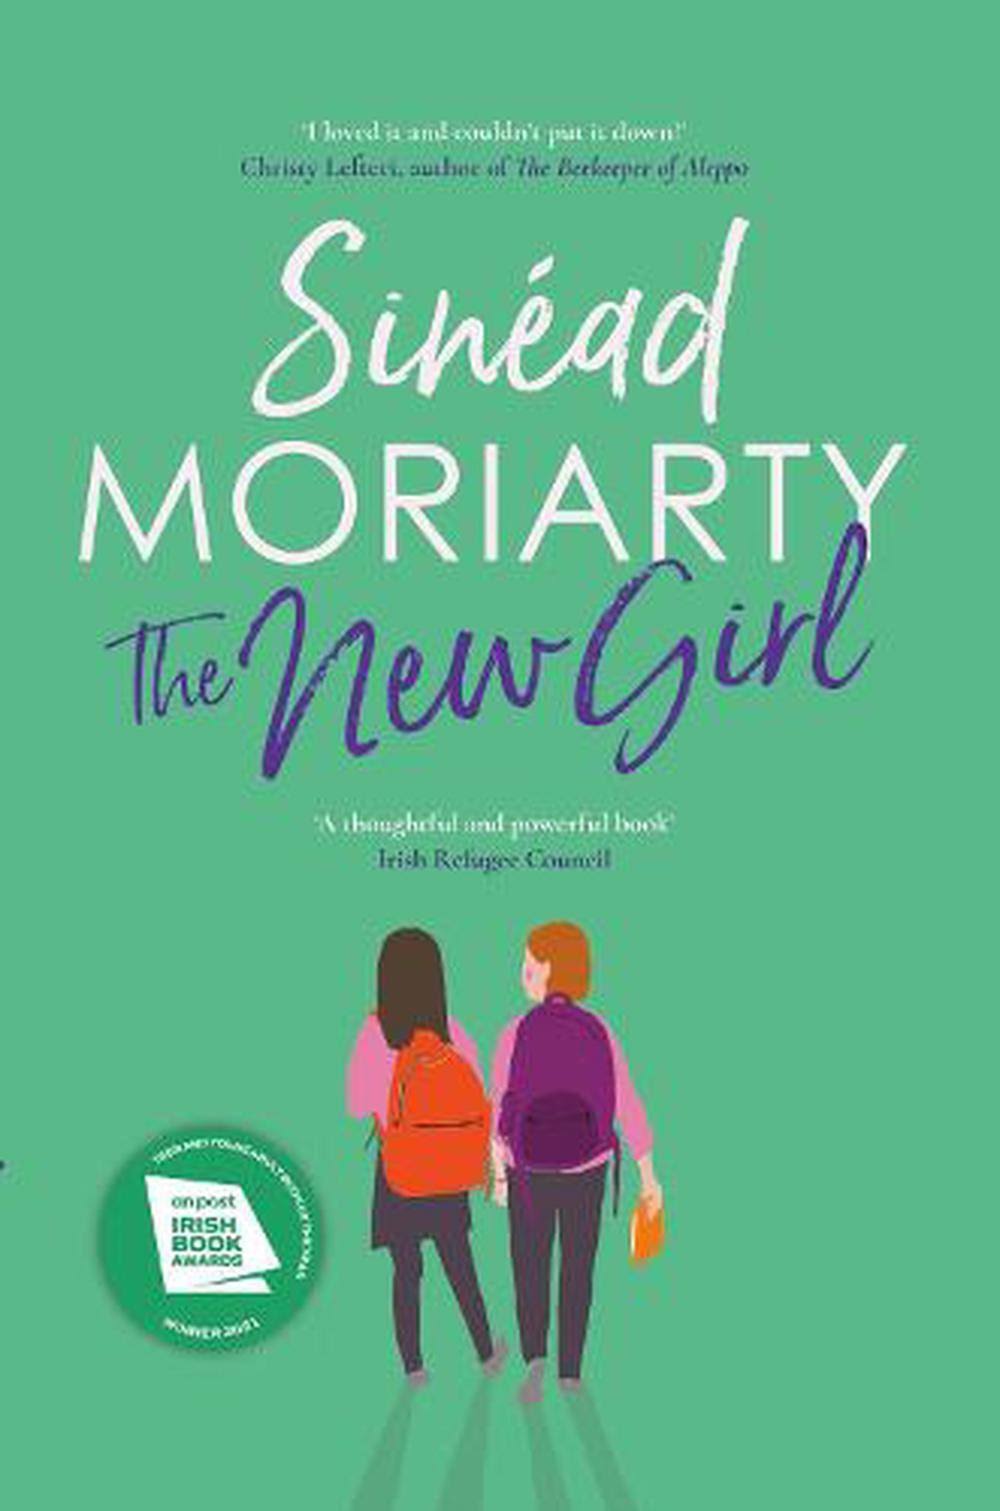 The New Girl by Sinead Moriarty